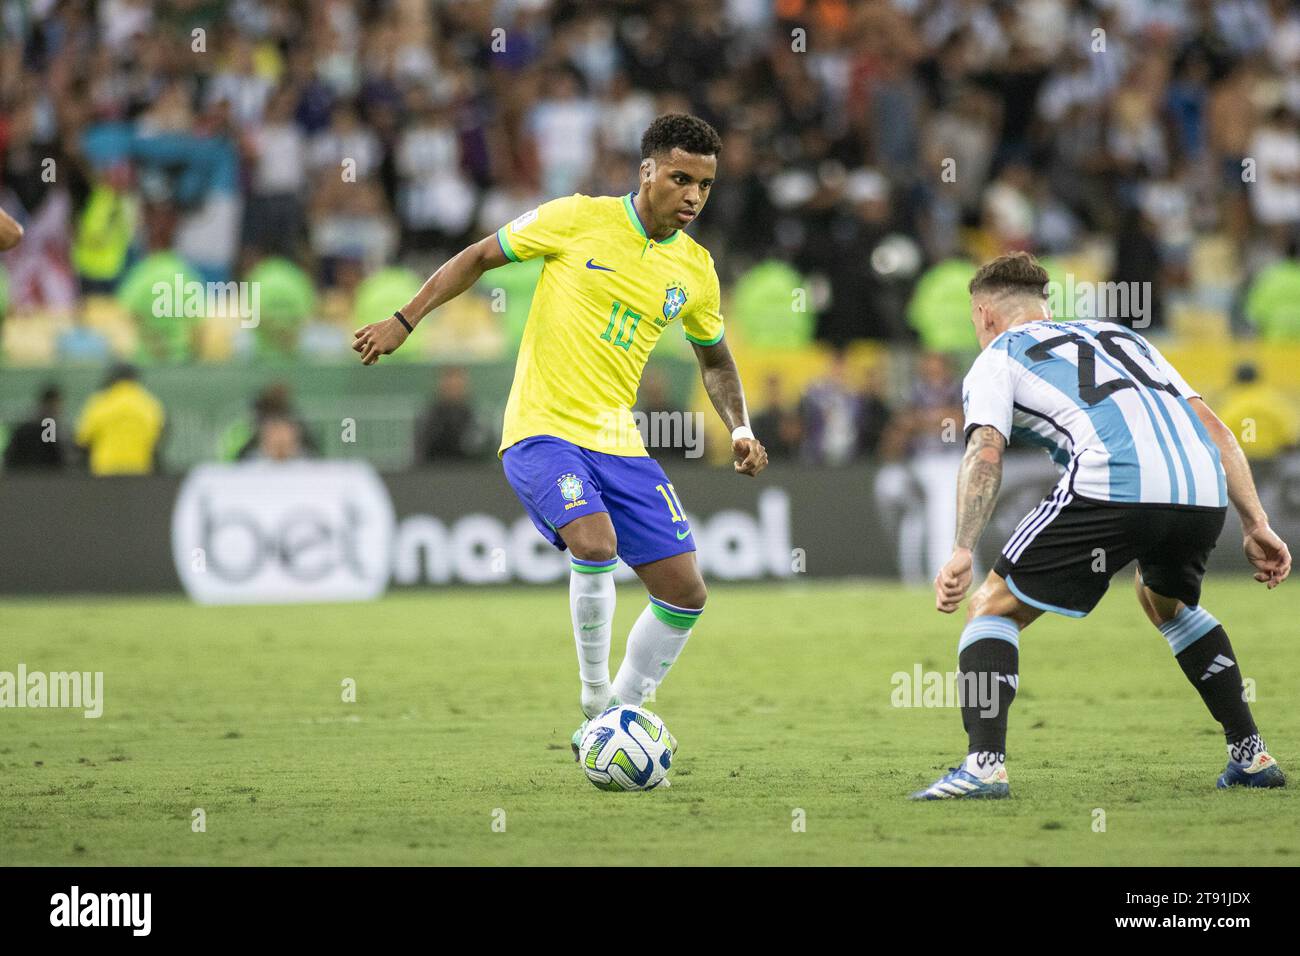 Rio De Janeiro, Brazil. 21st Nov, 2023. RIO DE JANEIRO, BRAZIL - NOVEMBER 21: Rodrygo of Brazil controls the ball during a match between Brazil and Argentina as part of 2026 FIFA World Cup South American Qualification at Maracana Stadium on November 21, 2023 in Rio de Janeiro, Brazil. (Photo by Wanderson Oliveira/PxImages) Credit: Px Images/Alamy Live News Stock Photo